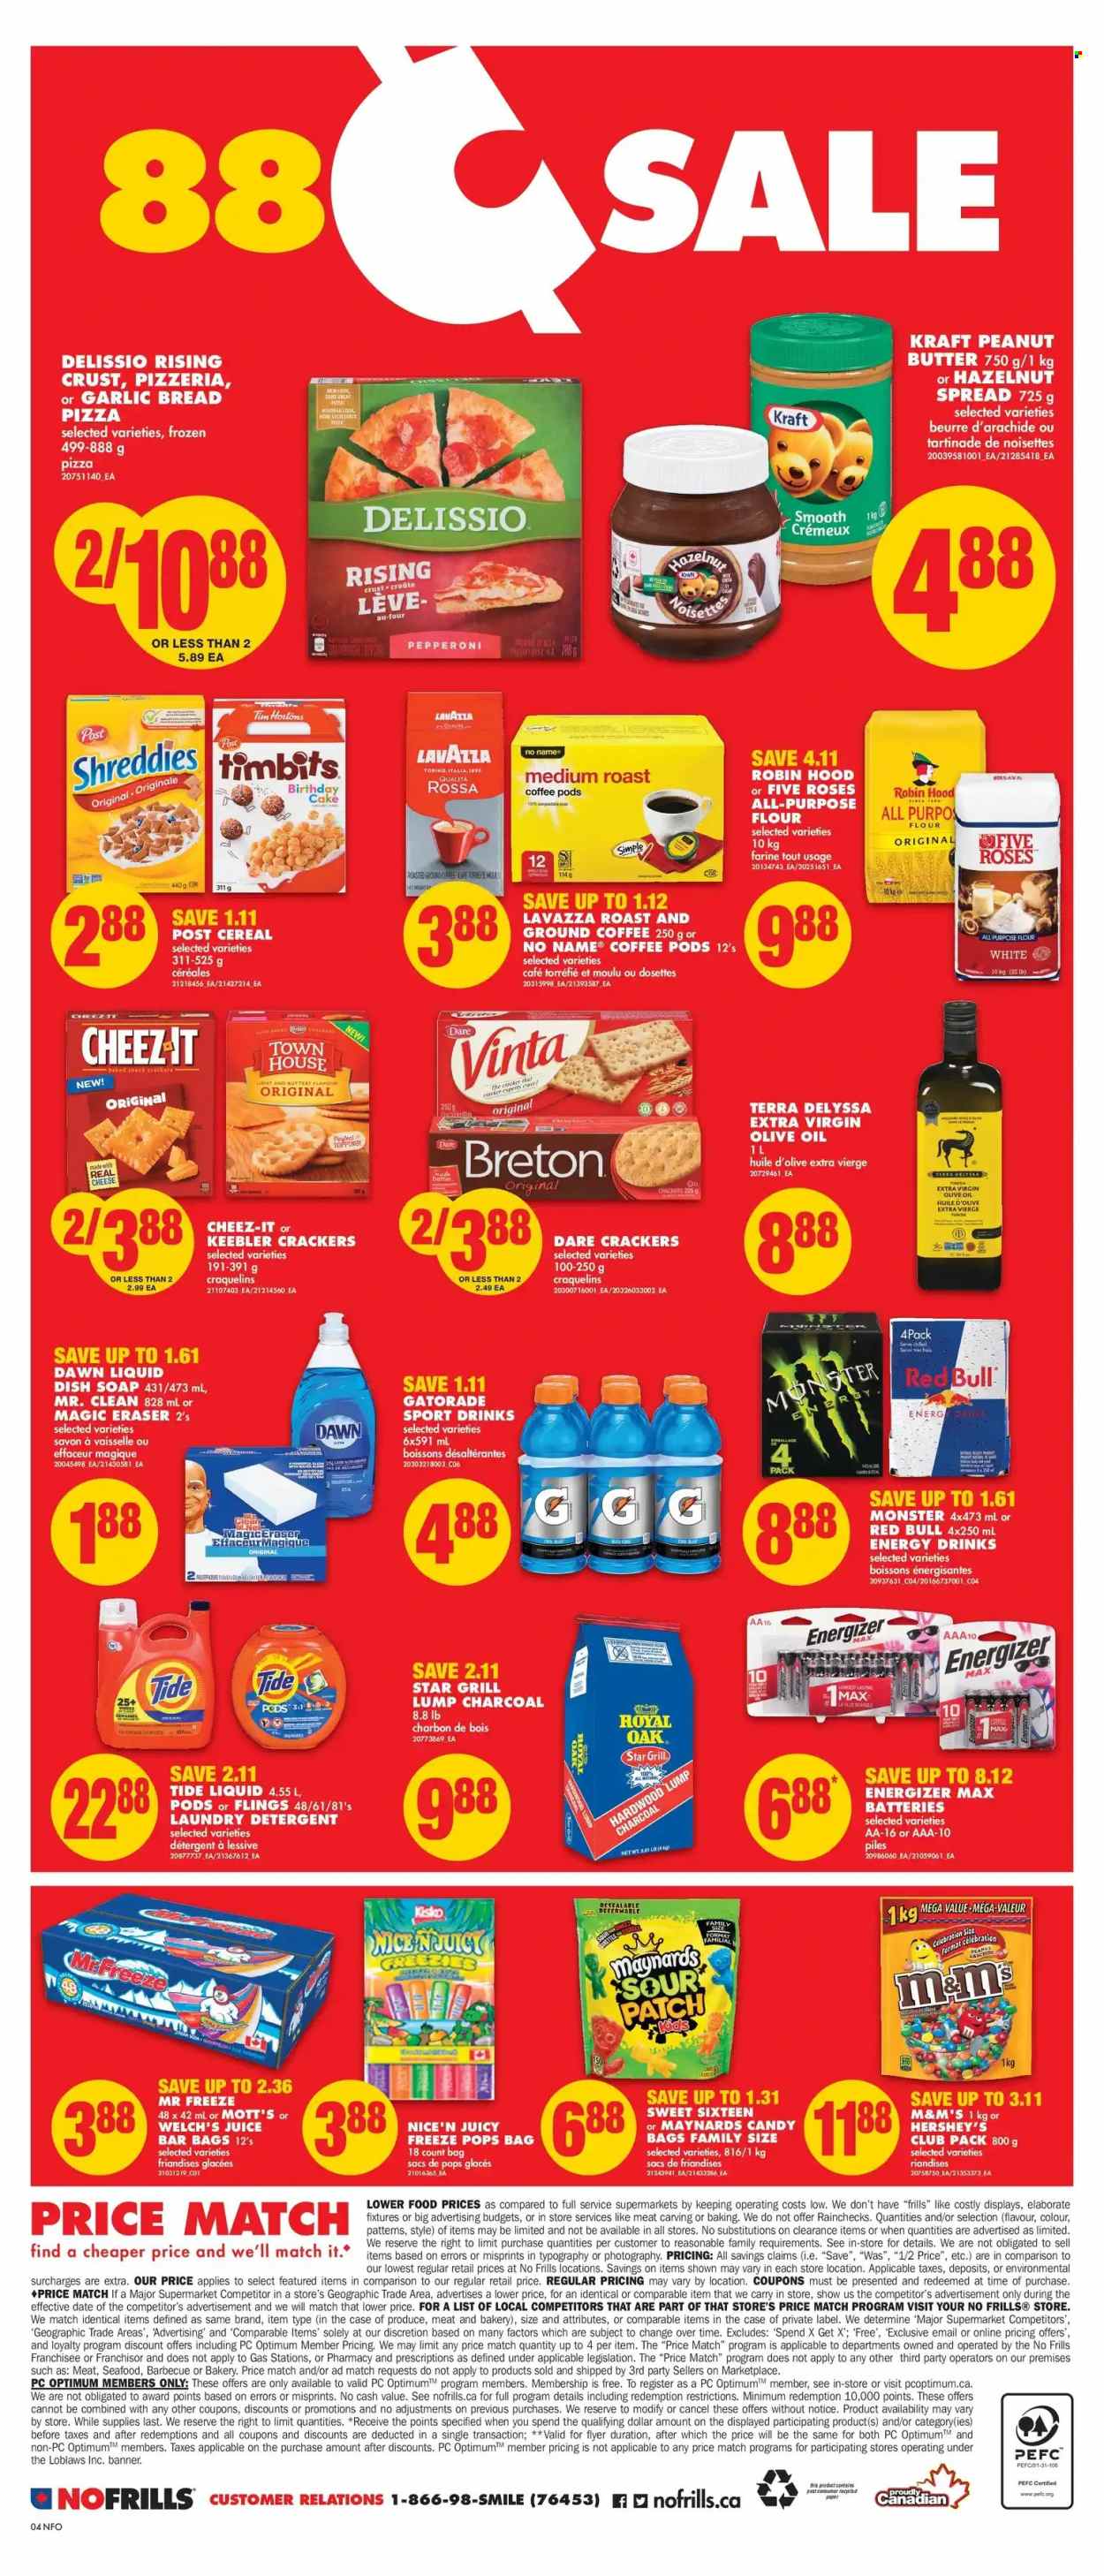 thumbnail - No Frills Flyer - June 30, 2022 - July 06, 2022 - Sales products - bread, cake, Welch's, Mott's, seafood, No Name, pizza, Kraft®, pepperoni, Hershey's, snack, Celebration, crackers, Keebler, Sour Patch, Cheez-It, all purpose flour, flour, topping, cereals, extra virgin olive oil, olive oil, oil, peanut butter, hazelnut spread, juice, energy drink, Monster, Red Bull, Monster Energy, Gatorade, coffee pods, ground coffee, Lavazza, Tide, laundry detergent, soap, eraser, battery, Optimum, detergent, Energizer, M&M's. Page 4.